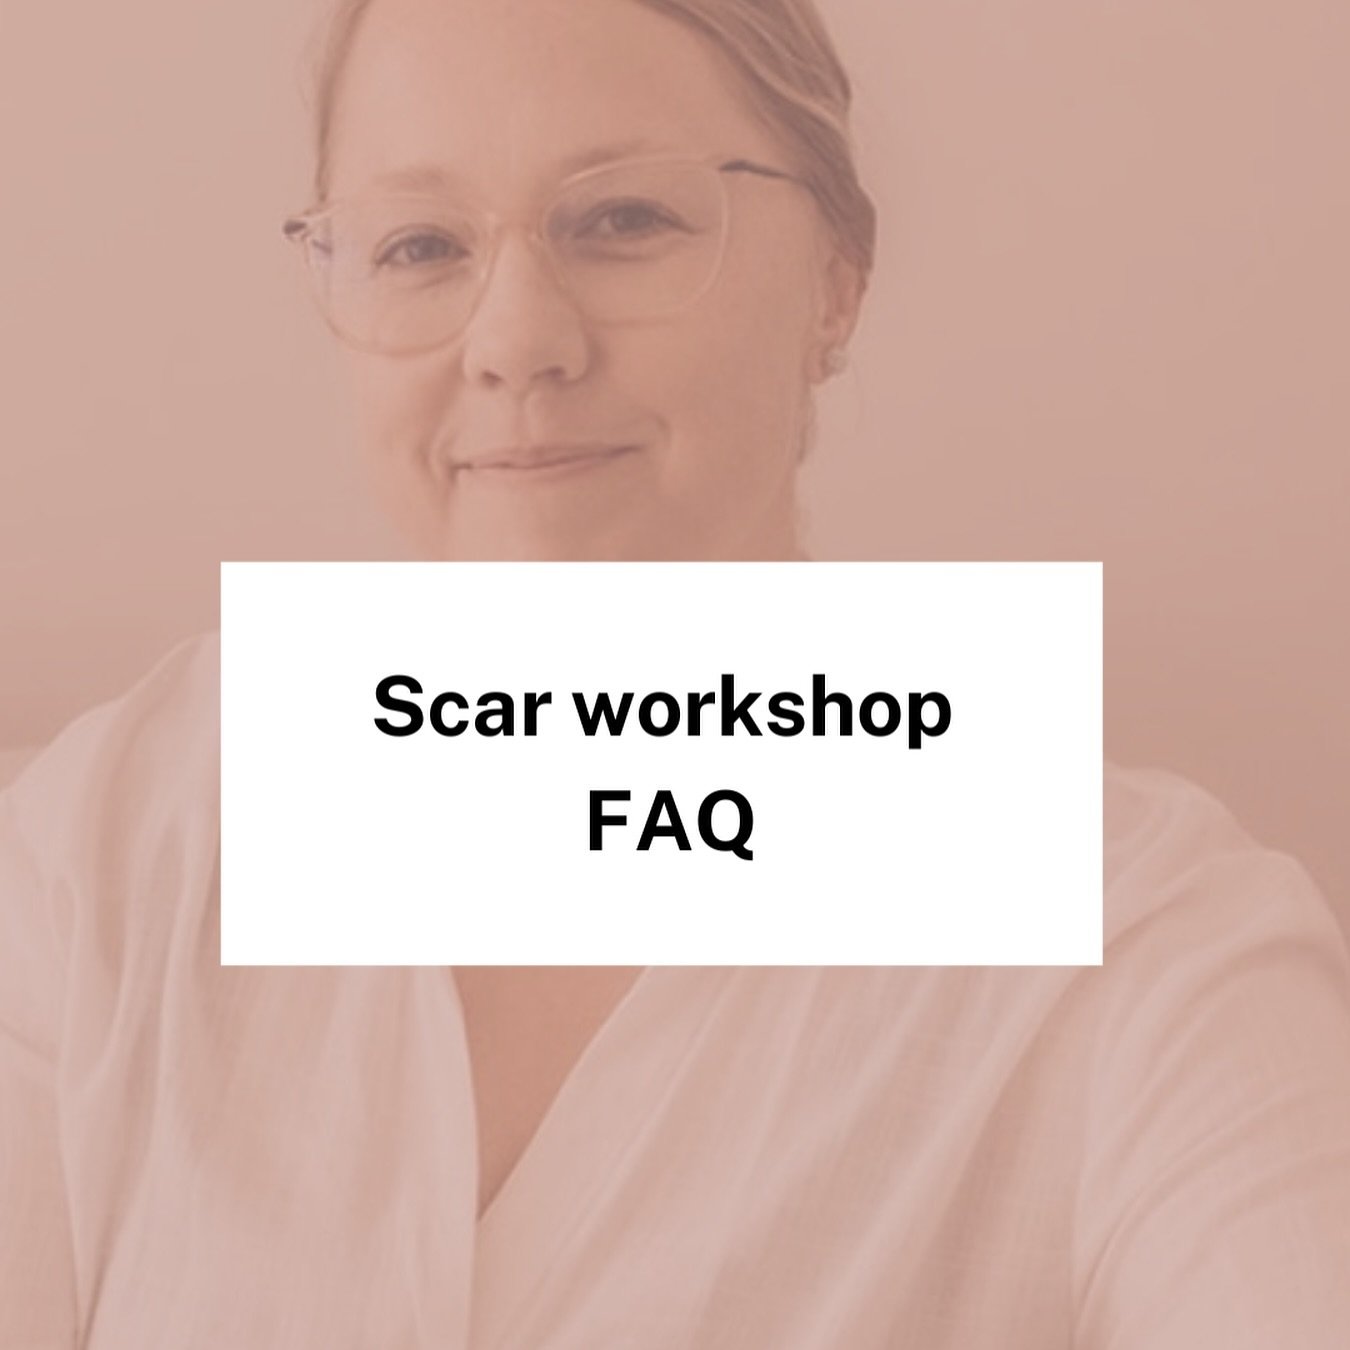 Here are the FAQ for the scar workshop. Did you have any other questions? 

#scar #scarrelease
#csectionrecovery #episiotomy #birthrecovery #csectionscar #csectionscarmassage #efttapping #clinicaleftpractitioner #burntoutmum #vagusnerve #windowoftole